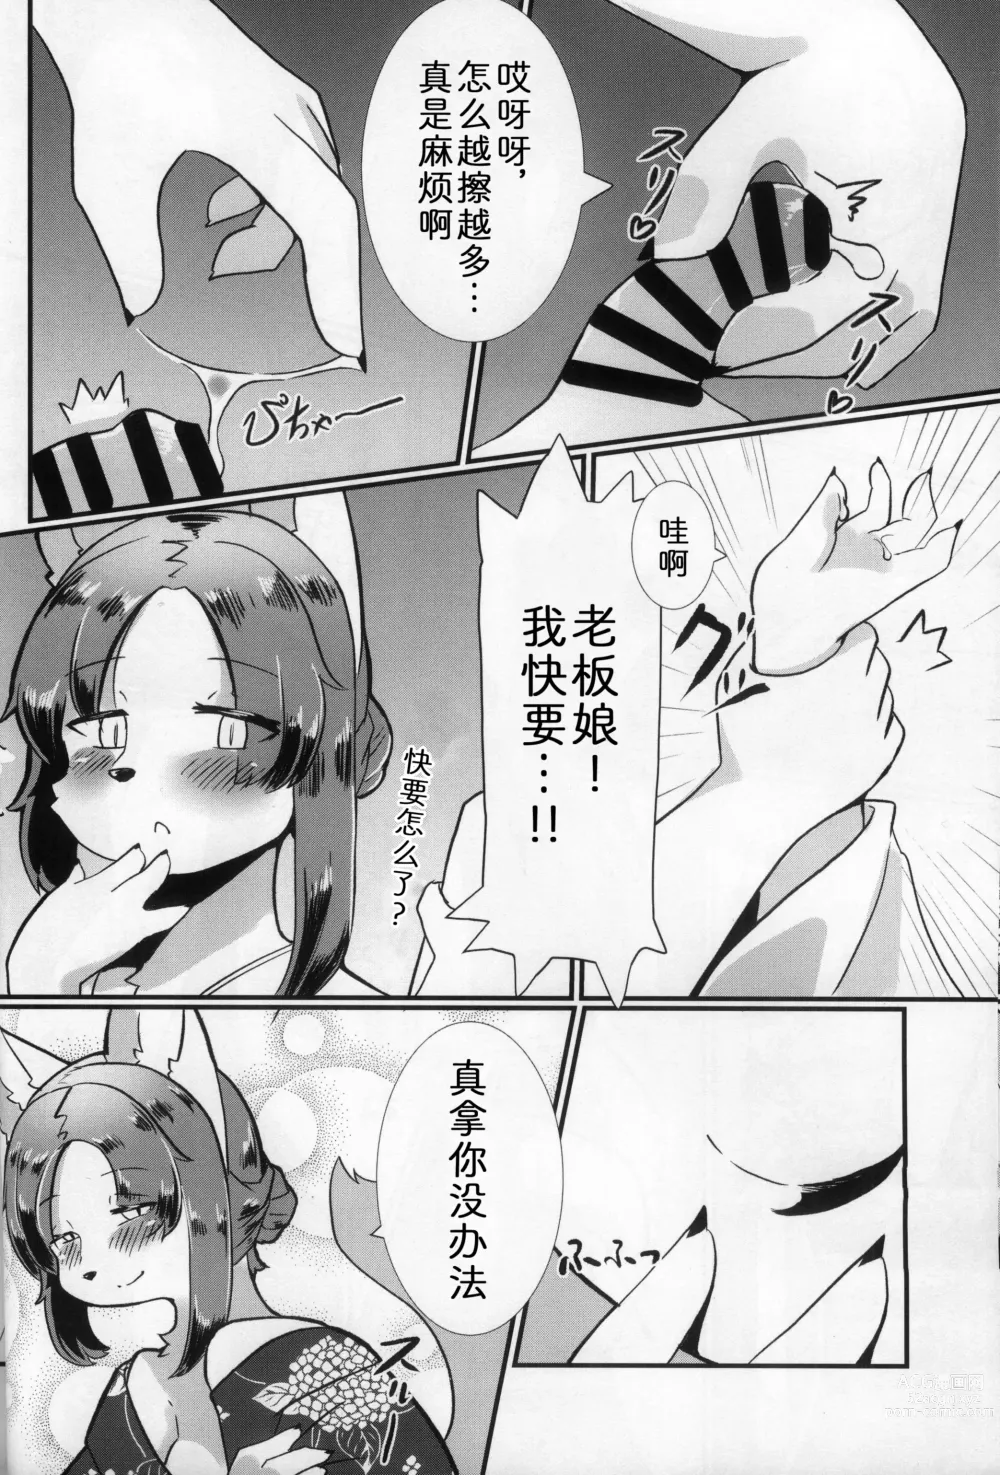 Page 10 of doujinshi 七彩之蝶